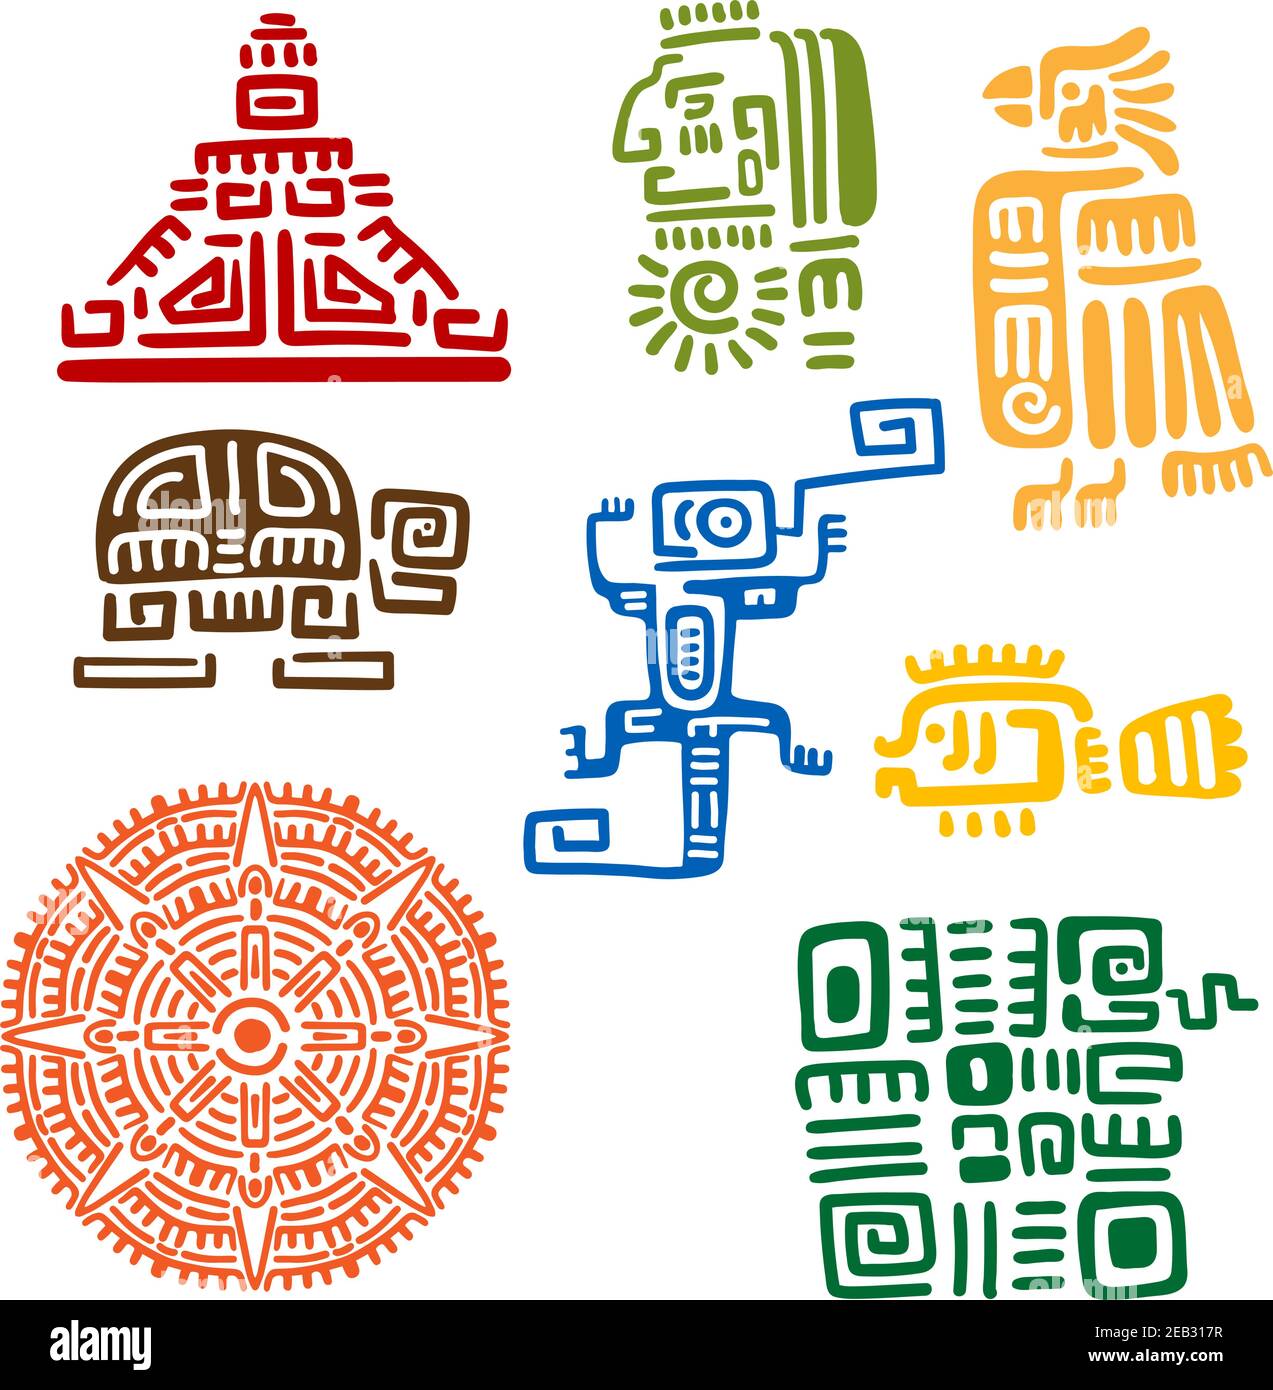 Amazon.com : CUTELIILI 10 Pcs Aztec and Viking Style Temporary Tattoo for  Men, Tribal Totem Tattoo Sticker Fake Tattoos for the Back of Hands and  Forearms, Cool Bule Half Sleeve Temporary Tattoo :